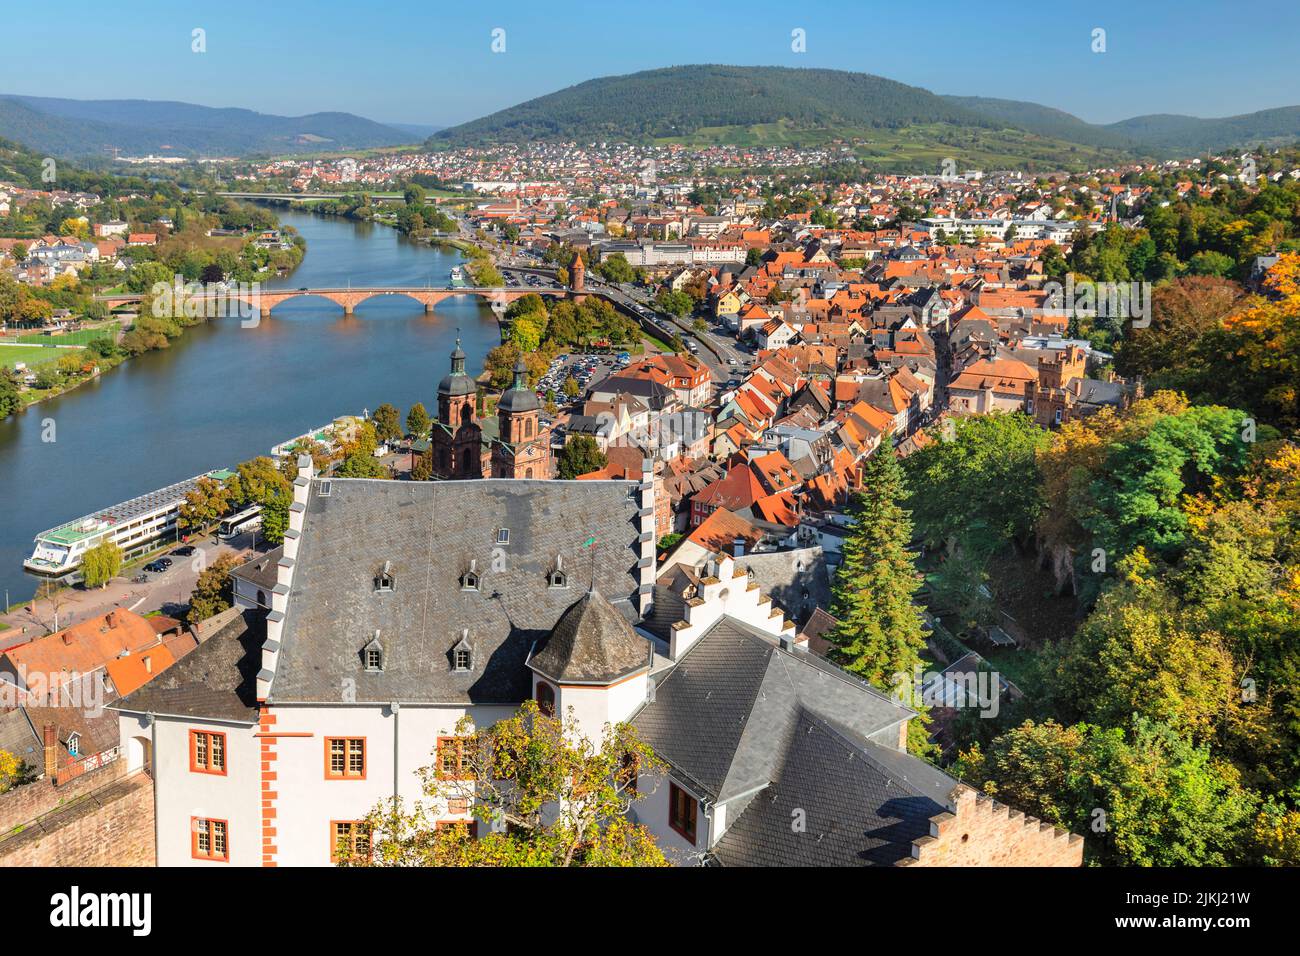 View from the Mildenburg over the old town of Miltenberg am Main, Lower Franconia, Bavaria, Germany Stock Photo